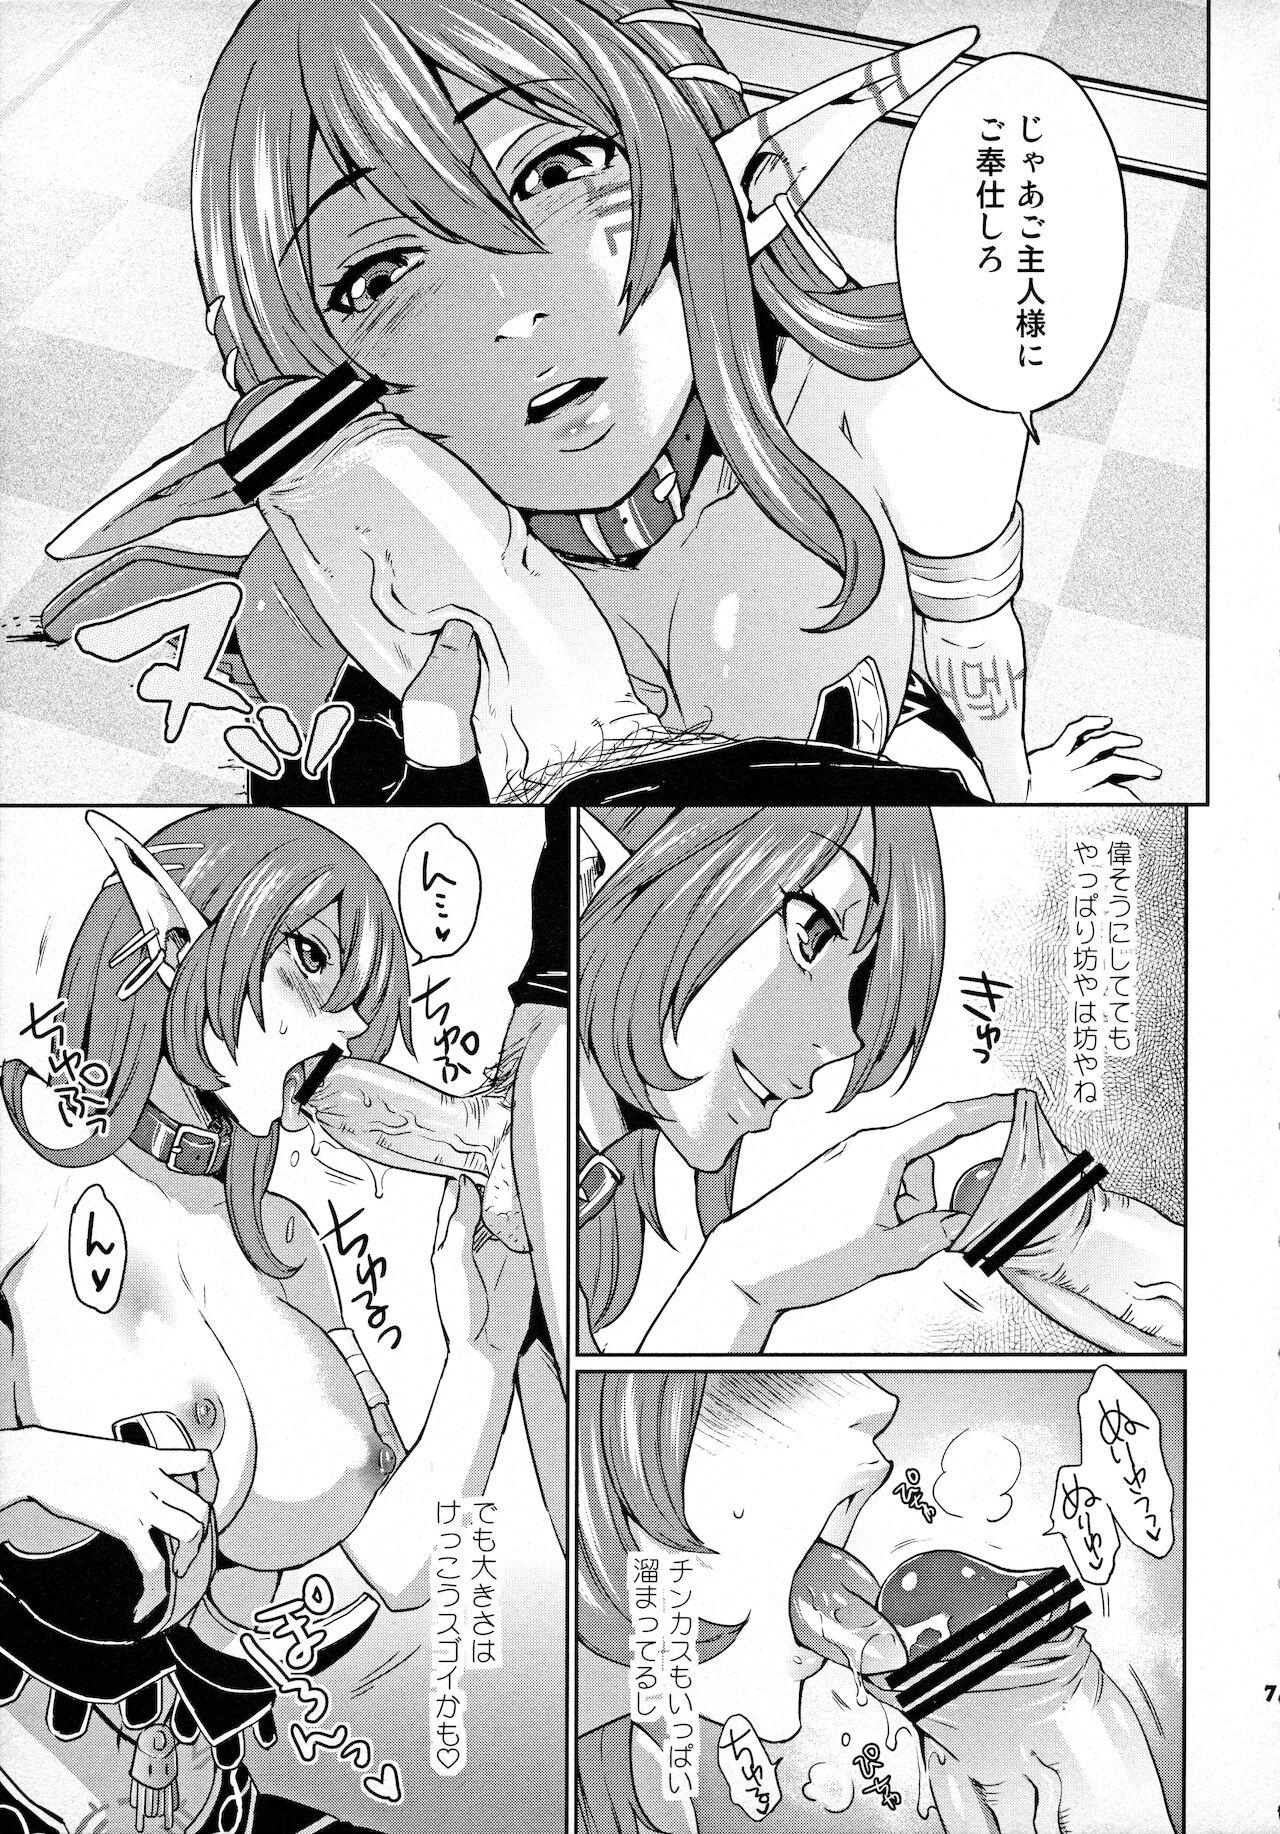 Sister Hoshi no Umi no Miboujin - The Widow of The Star Ocean - Star ocean 4 Blowjobs - Page 6